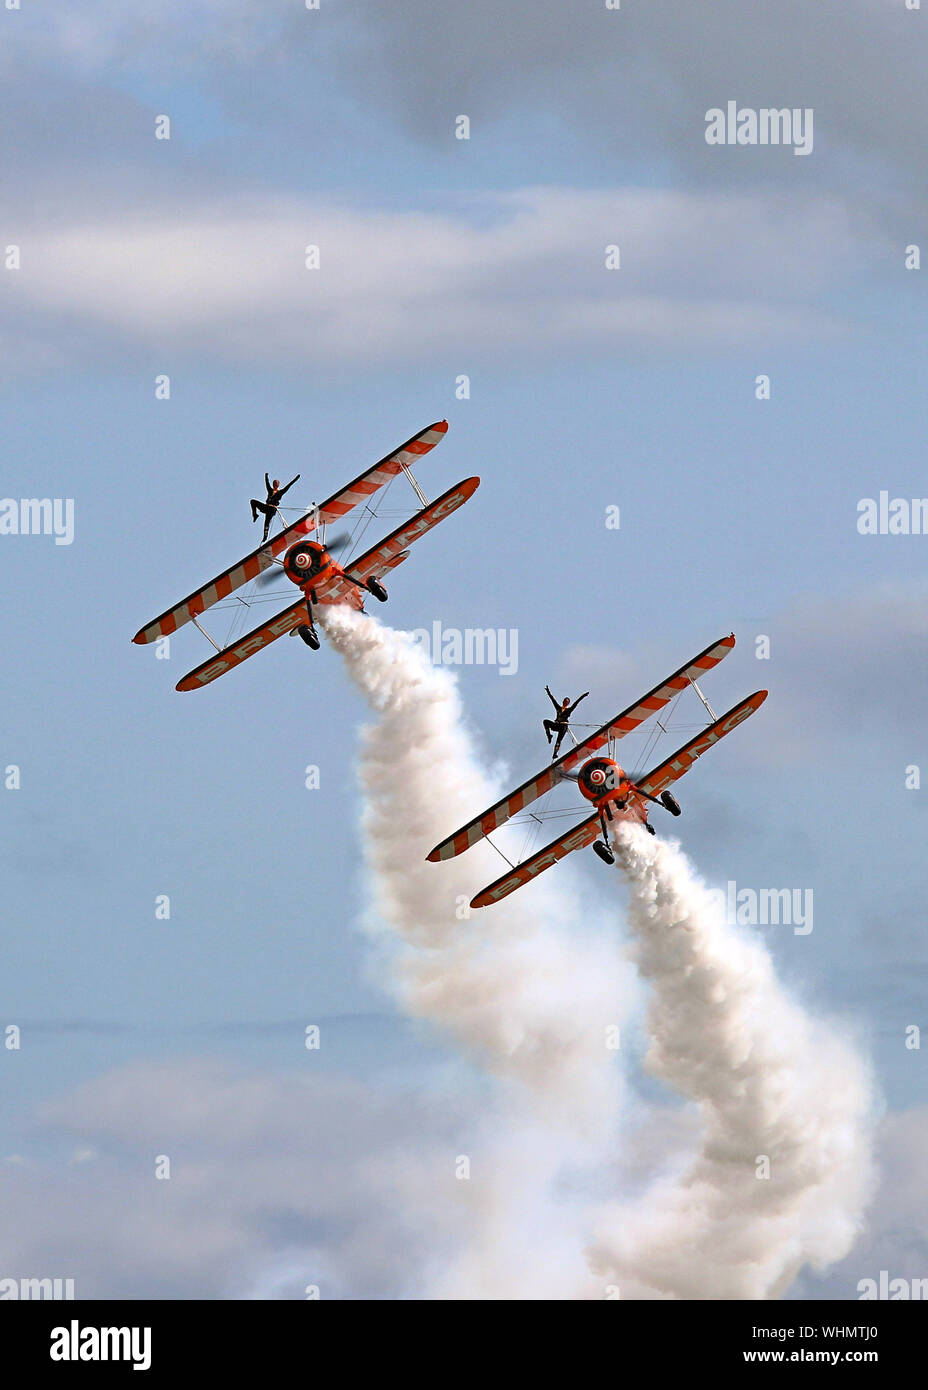 The Breitling Wingwalkers with their 1940's biplanes and the young ladies strapped on top wows the crowd at Eastbourne's International Airshow, 2017. Stock Photo